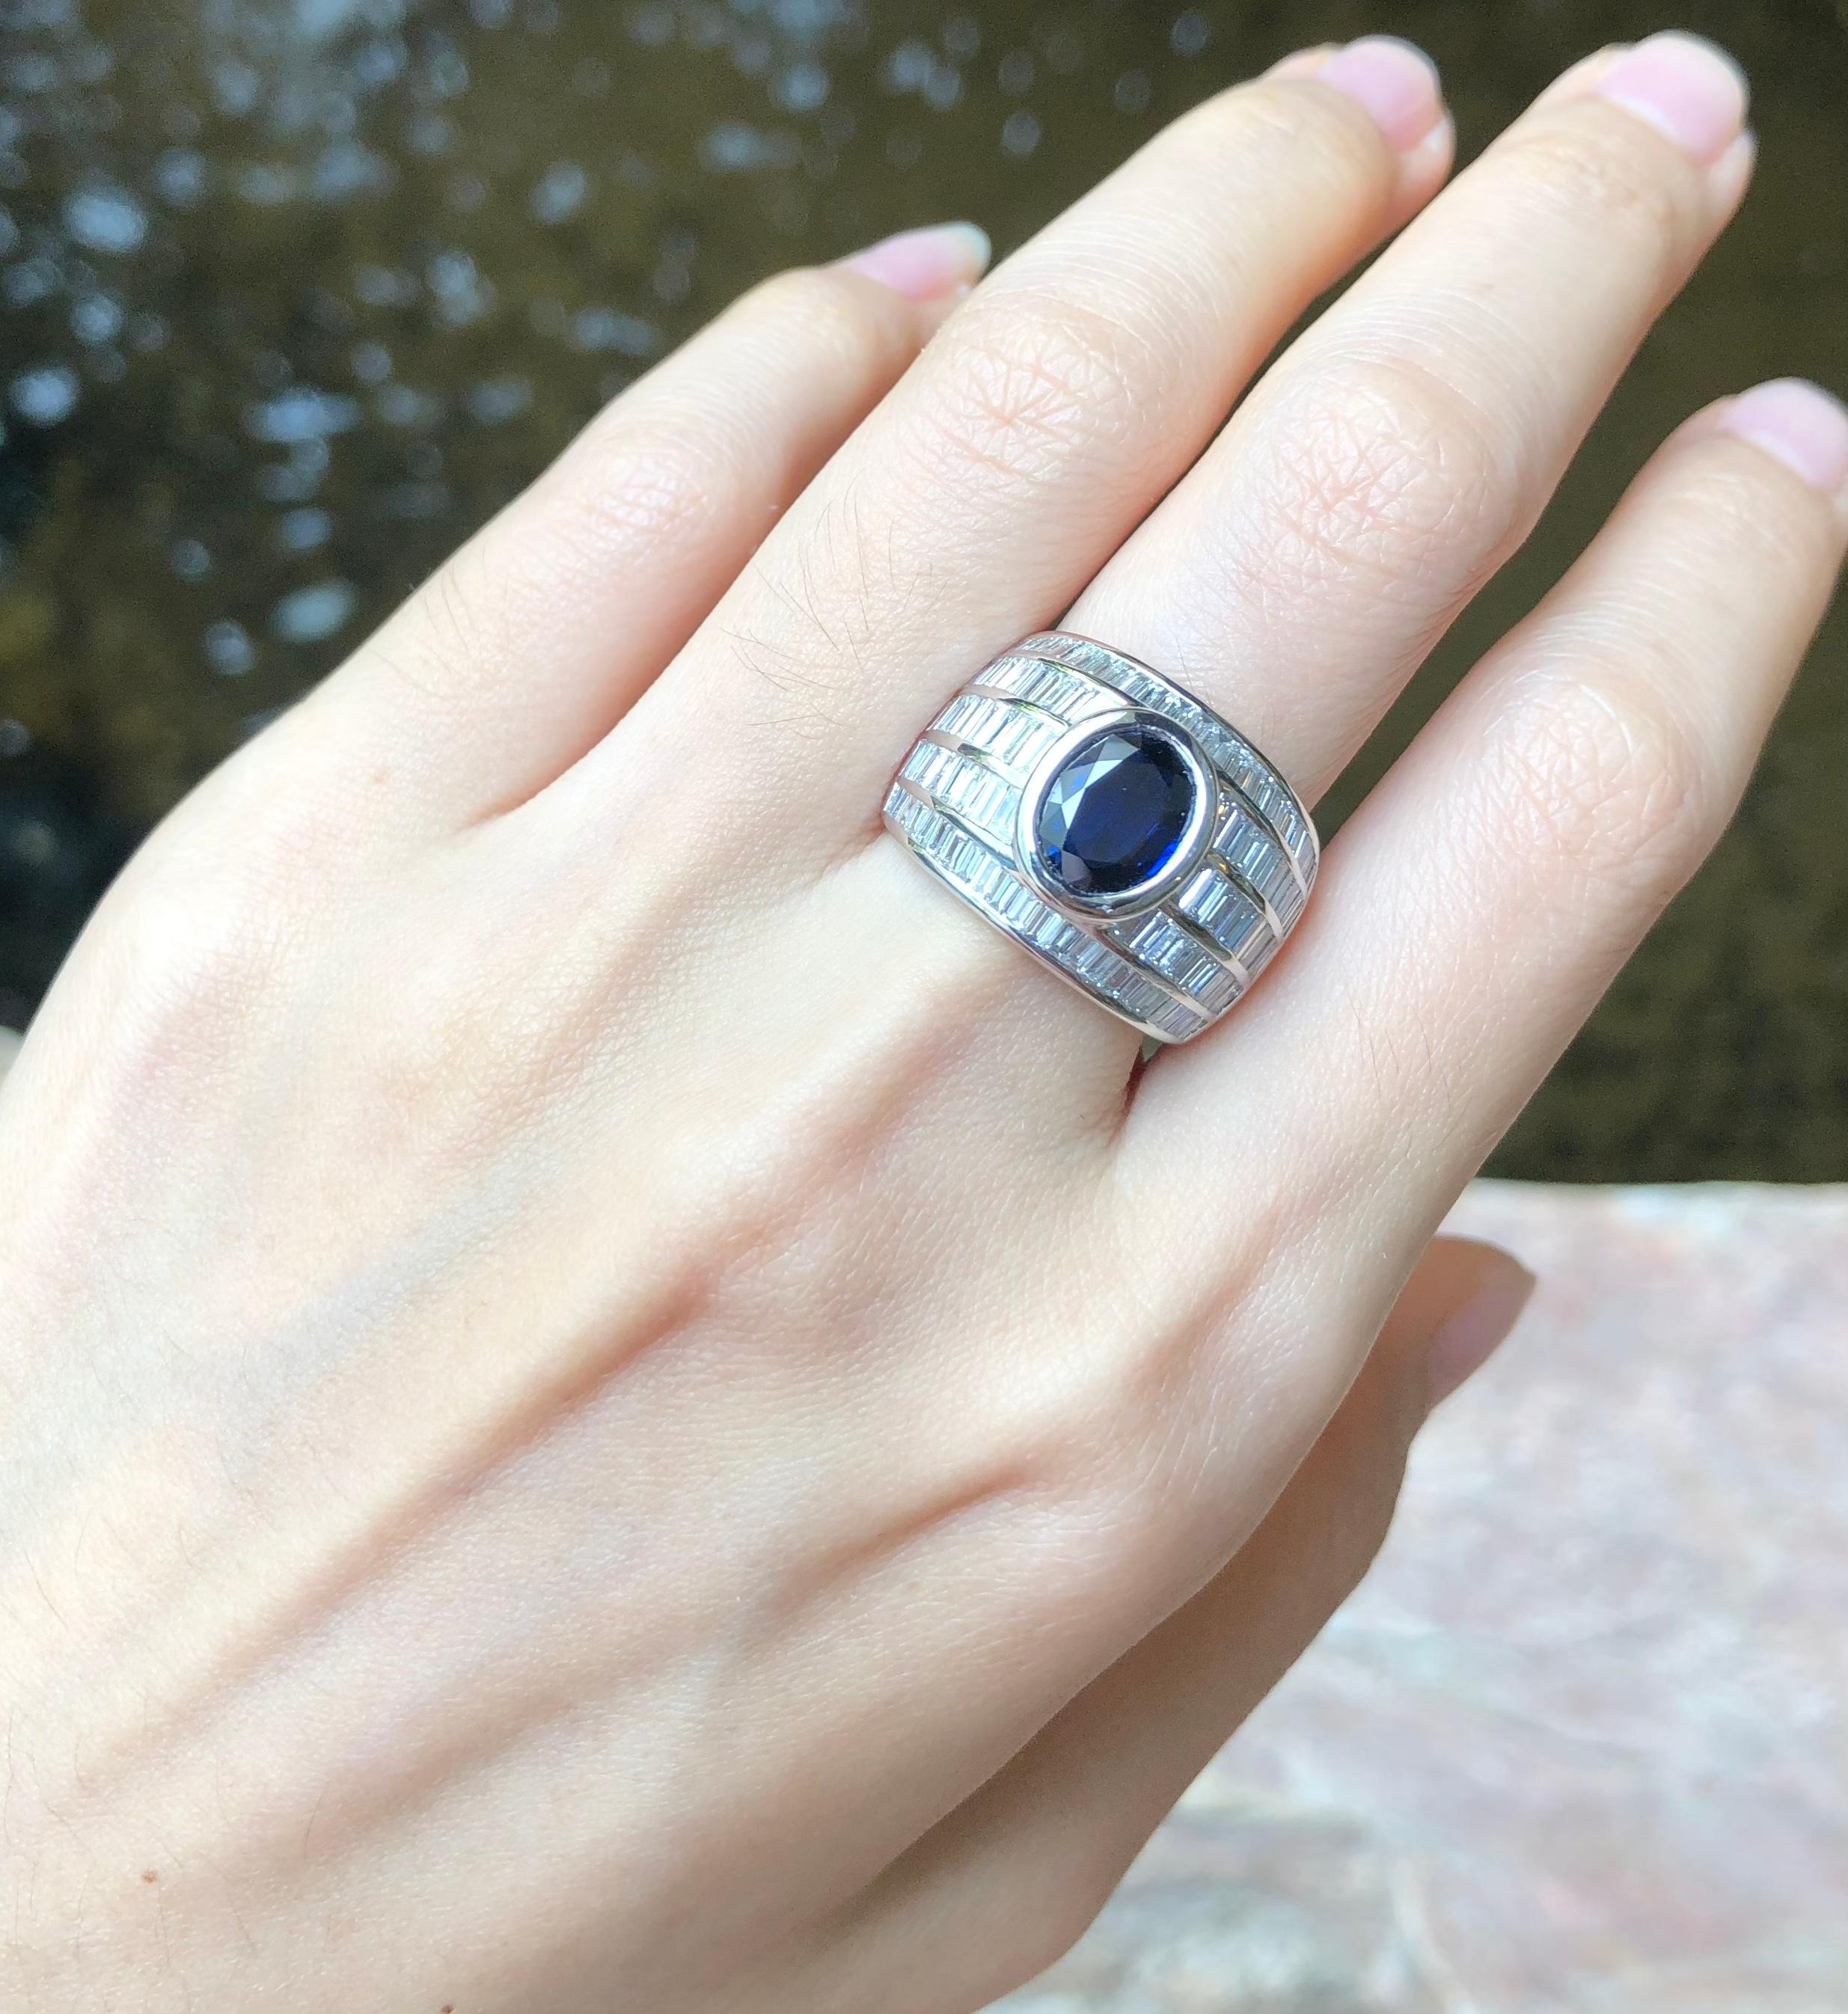 Blue Sapphire 2.02 carats with Diamond 2.52 carats Ring set in 18 Karat White Gold Settings

Width:  22 cm 
Length:  1.6 cm
Ring Size: 55
Total Weight: 15.78 grams

Blue Sapphire 
Width:  0.9 cm 
Length:  1.1 cm

